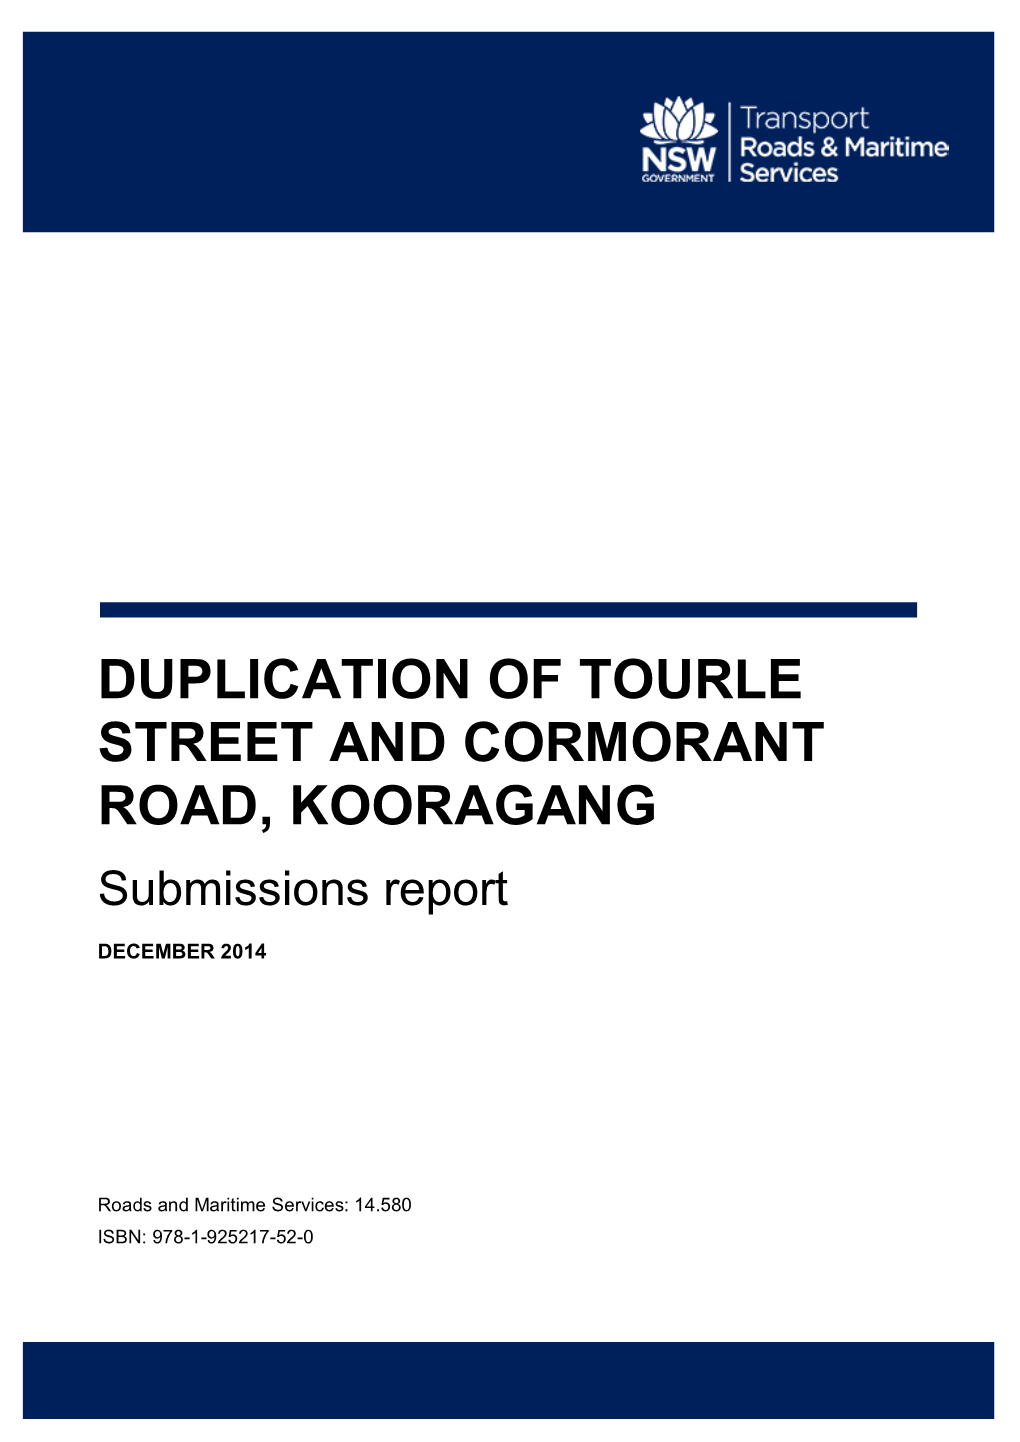 DUPLICATION of TOURLE STREET and CORMORANT ROAD, KOORAGANG Submissions Report